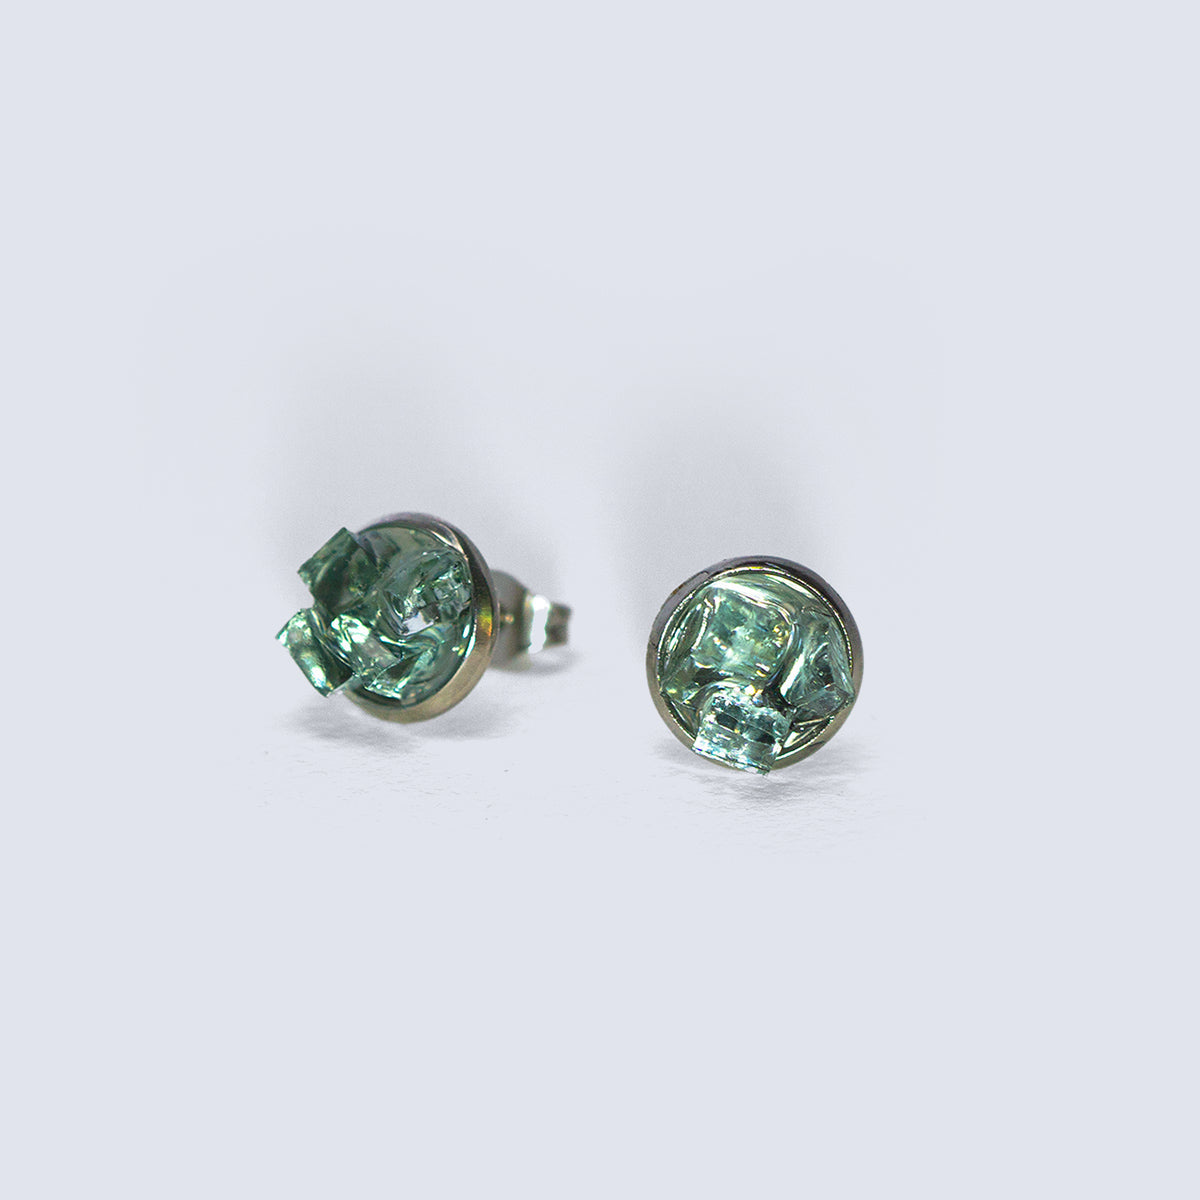 Auto Glass Earring - 8mm Cluster Stud in Green Cluster Cleveland Street Glass 